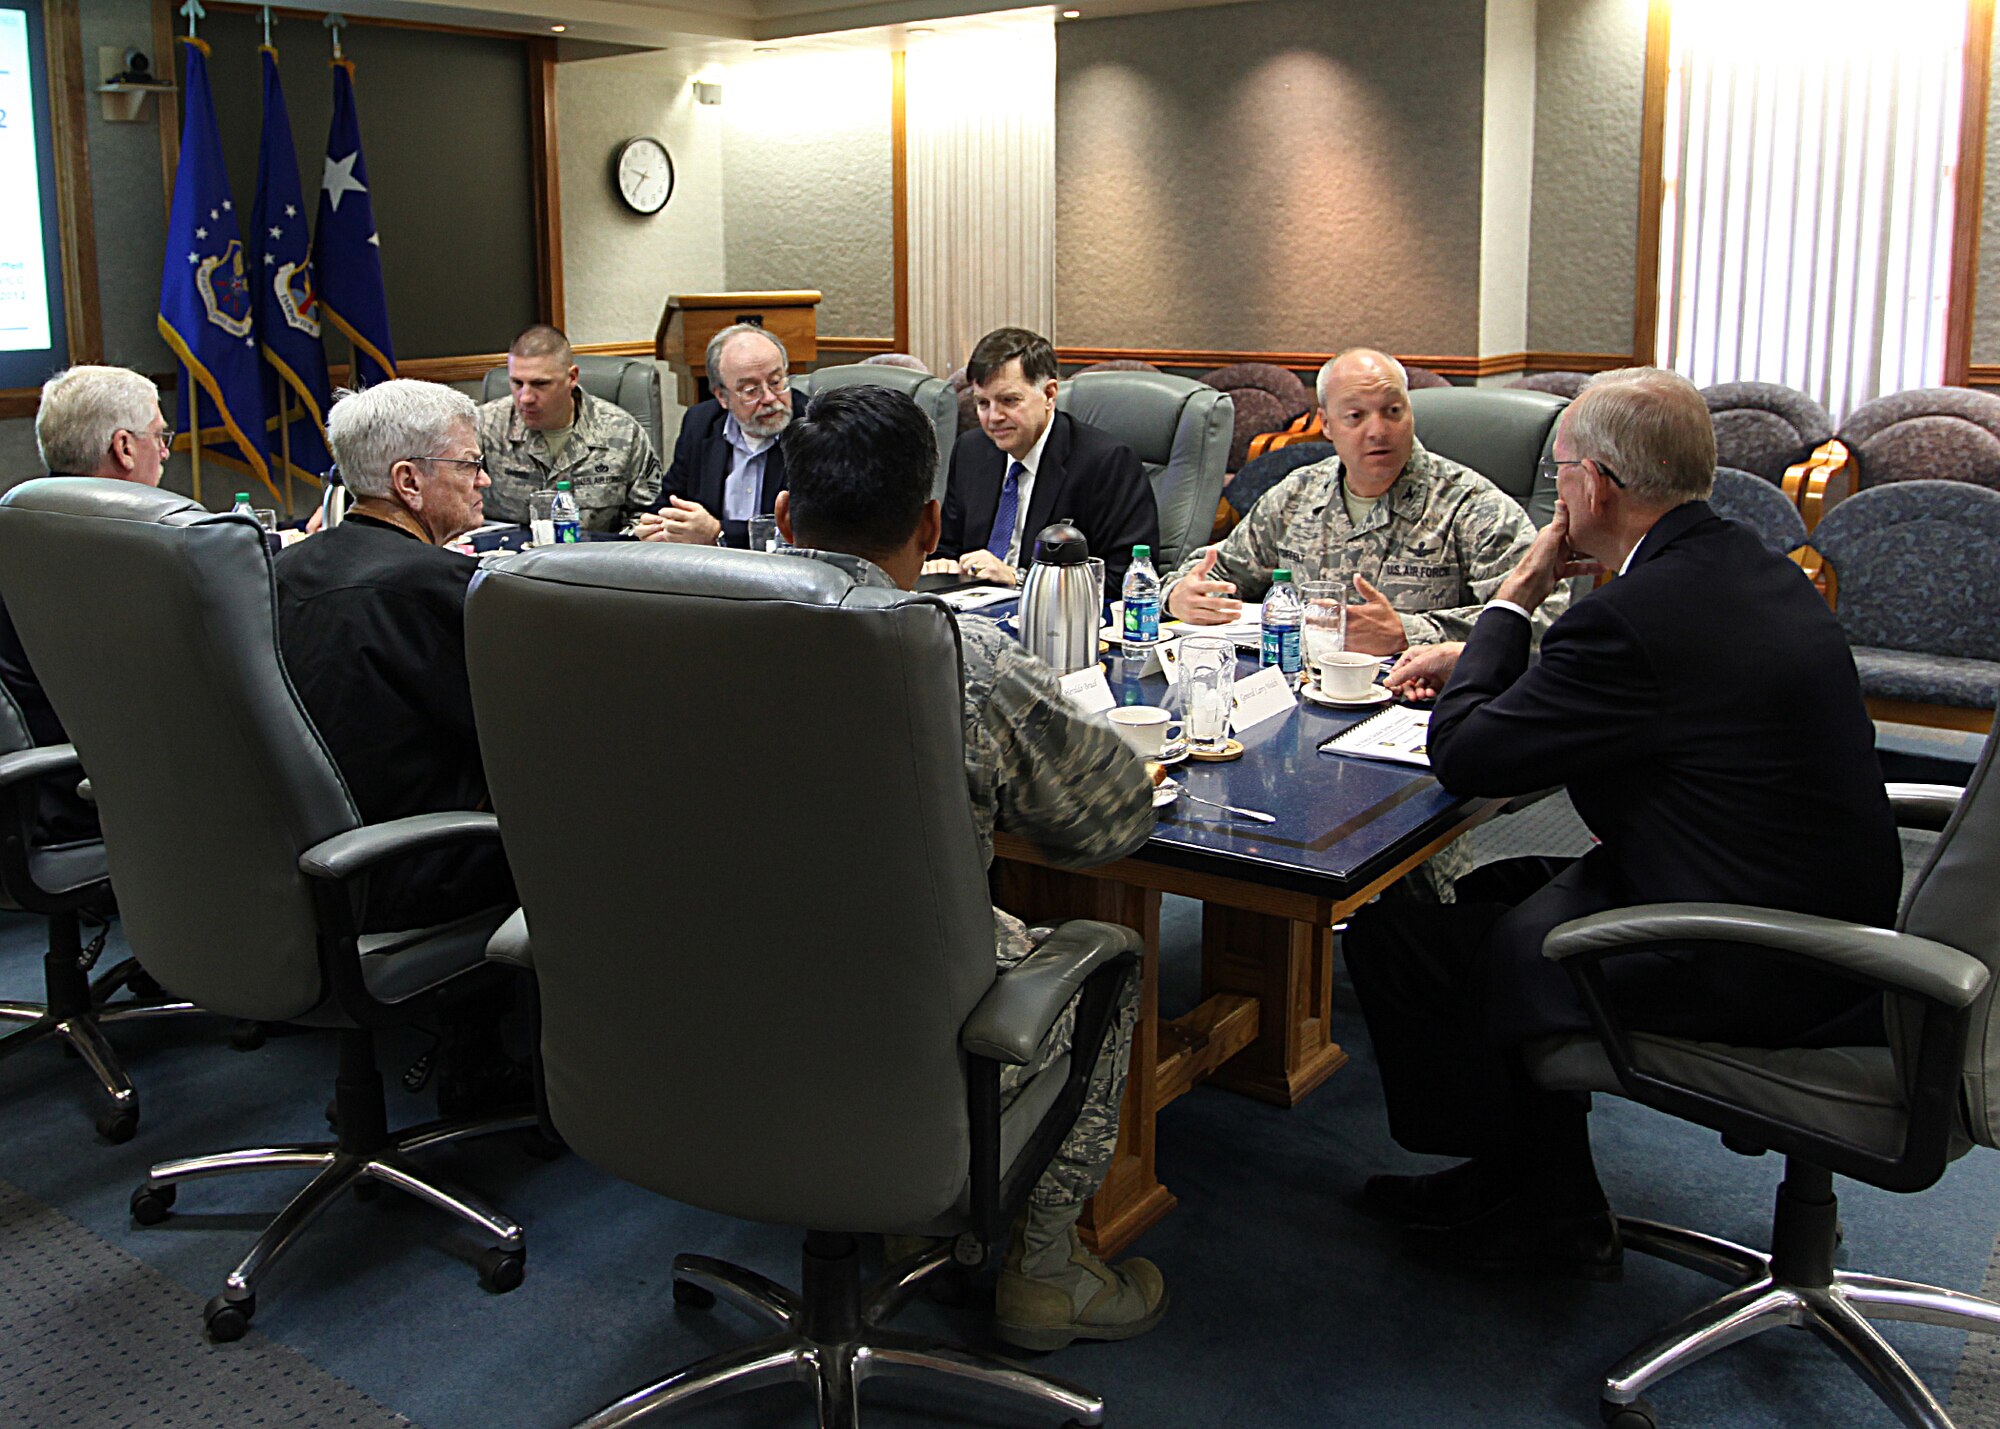 Retired Gen. Larry Welch, former Air Force Chief of Staff; Dr. Peter Nanos, Johns Hopkins University Applied Physics Laboratory; Dr. Robert Selden, Special Government Employee; Jim Gosler, CIA Clandestine Services; and David McDarby, Defense Threat Reduction Agency Nuclear Surety Branch chief, meet with Col. Christopher Coffelt, 90th Missile Wing commander; Col. Heraldo Brual, 341st Missile Wing commander; and Chief Master Sgt. Michael Garrou, 90th Missile Wing command chief, during the Defense Science Board visit to F. E. Warren Air Force Base, Wyo., Sept. 20. (U.S. Air Force photo by Matt Bilden)